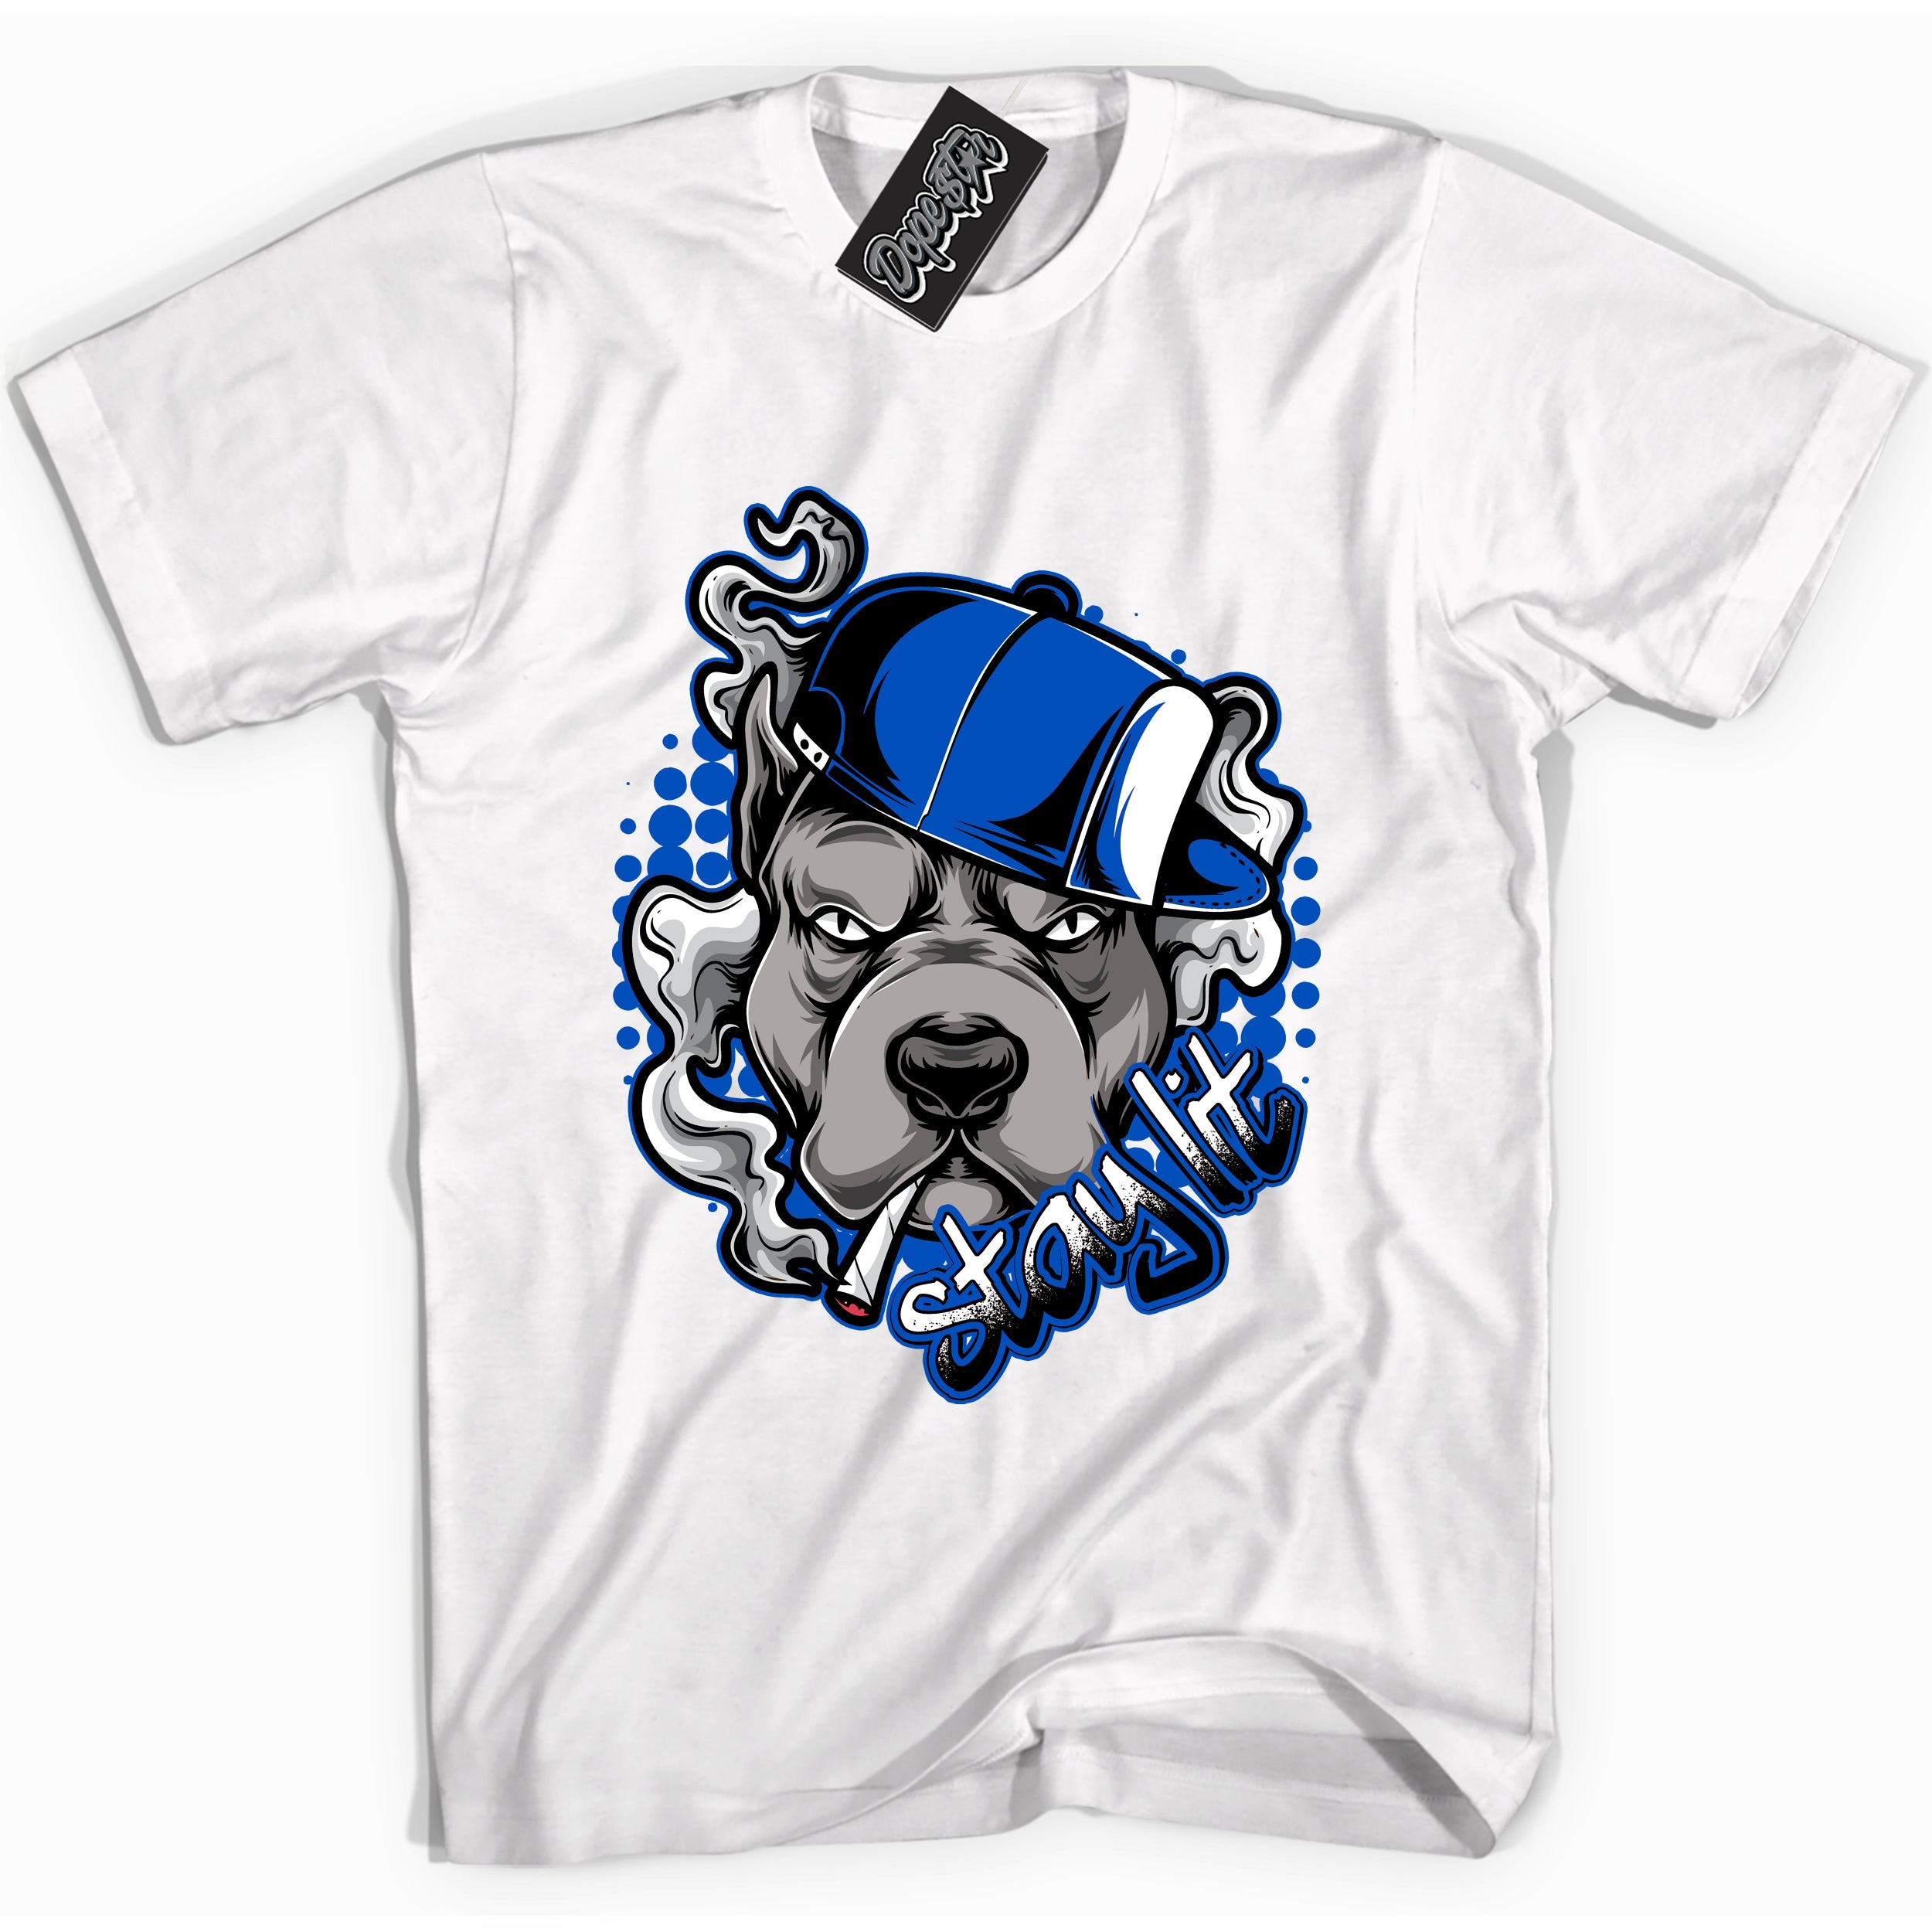 Cool White graphic tee with "Stay Lit" design, that perfectly matches Royal Reimagined 1s sneakers 